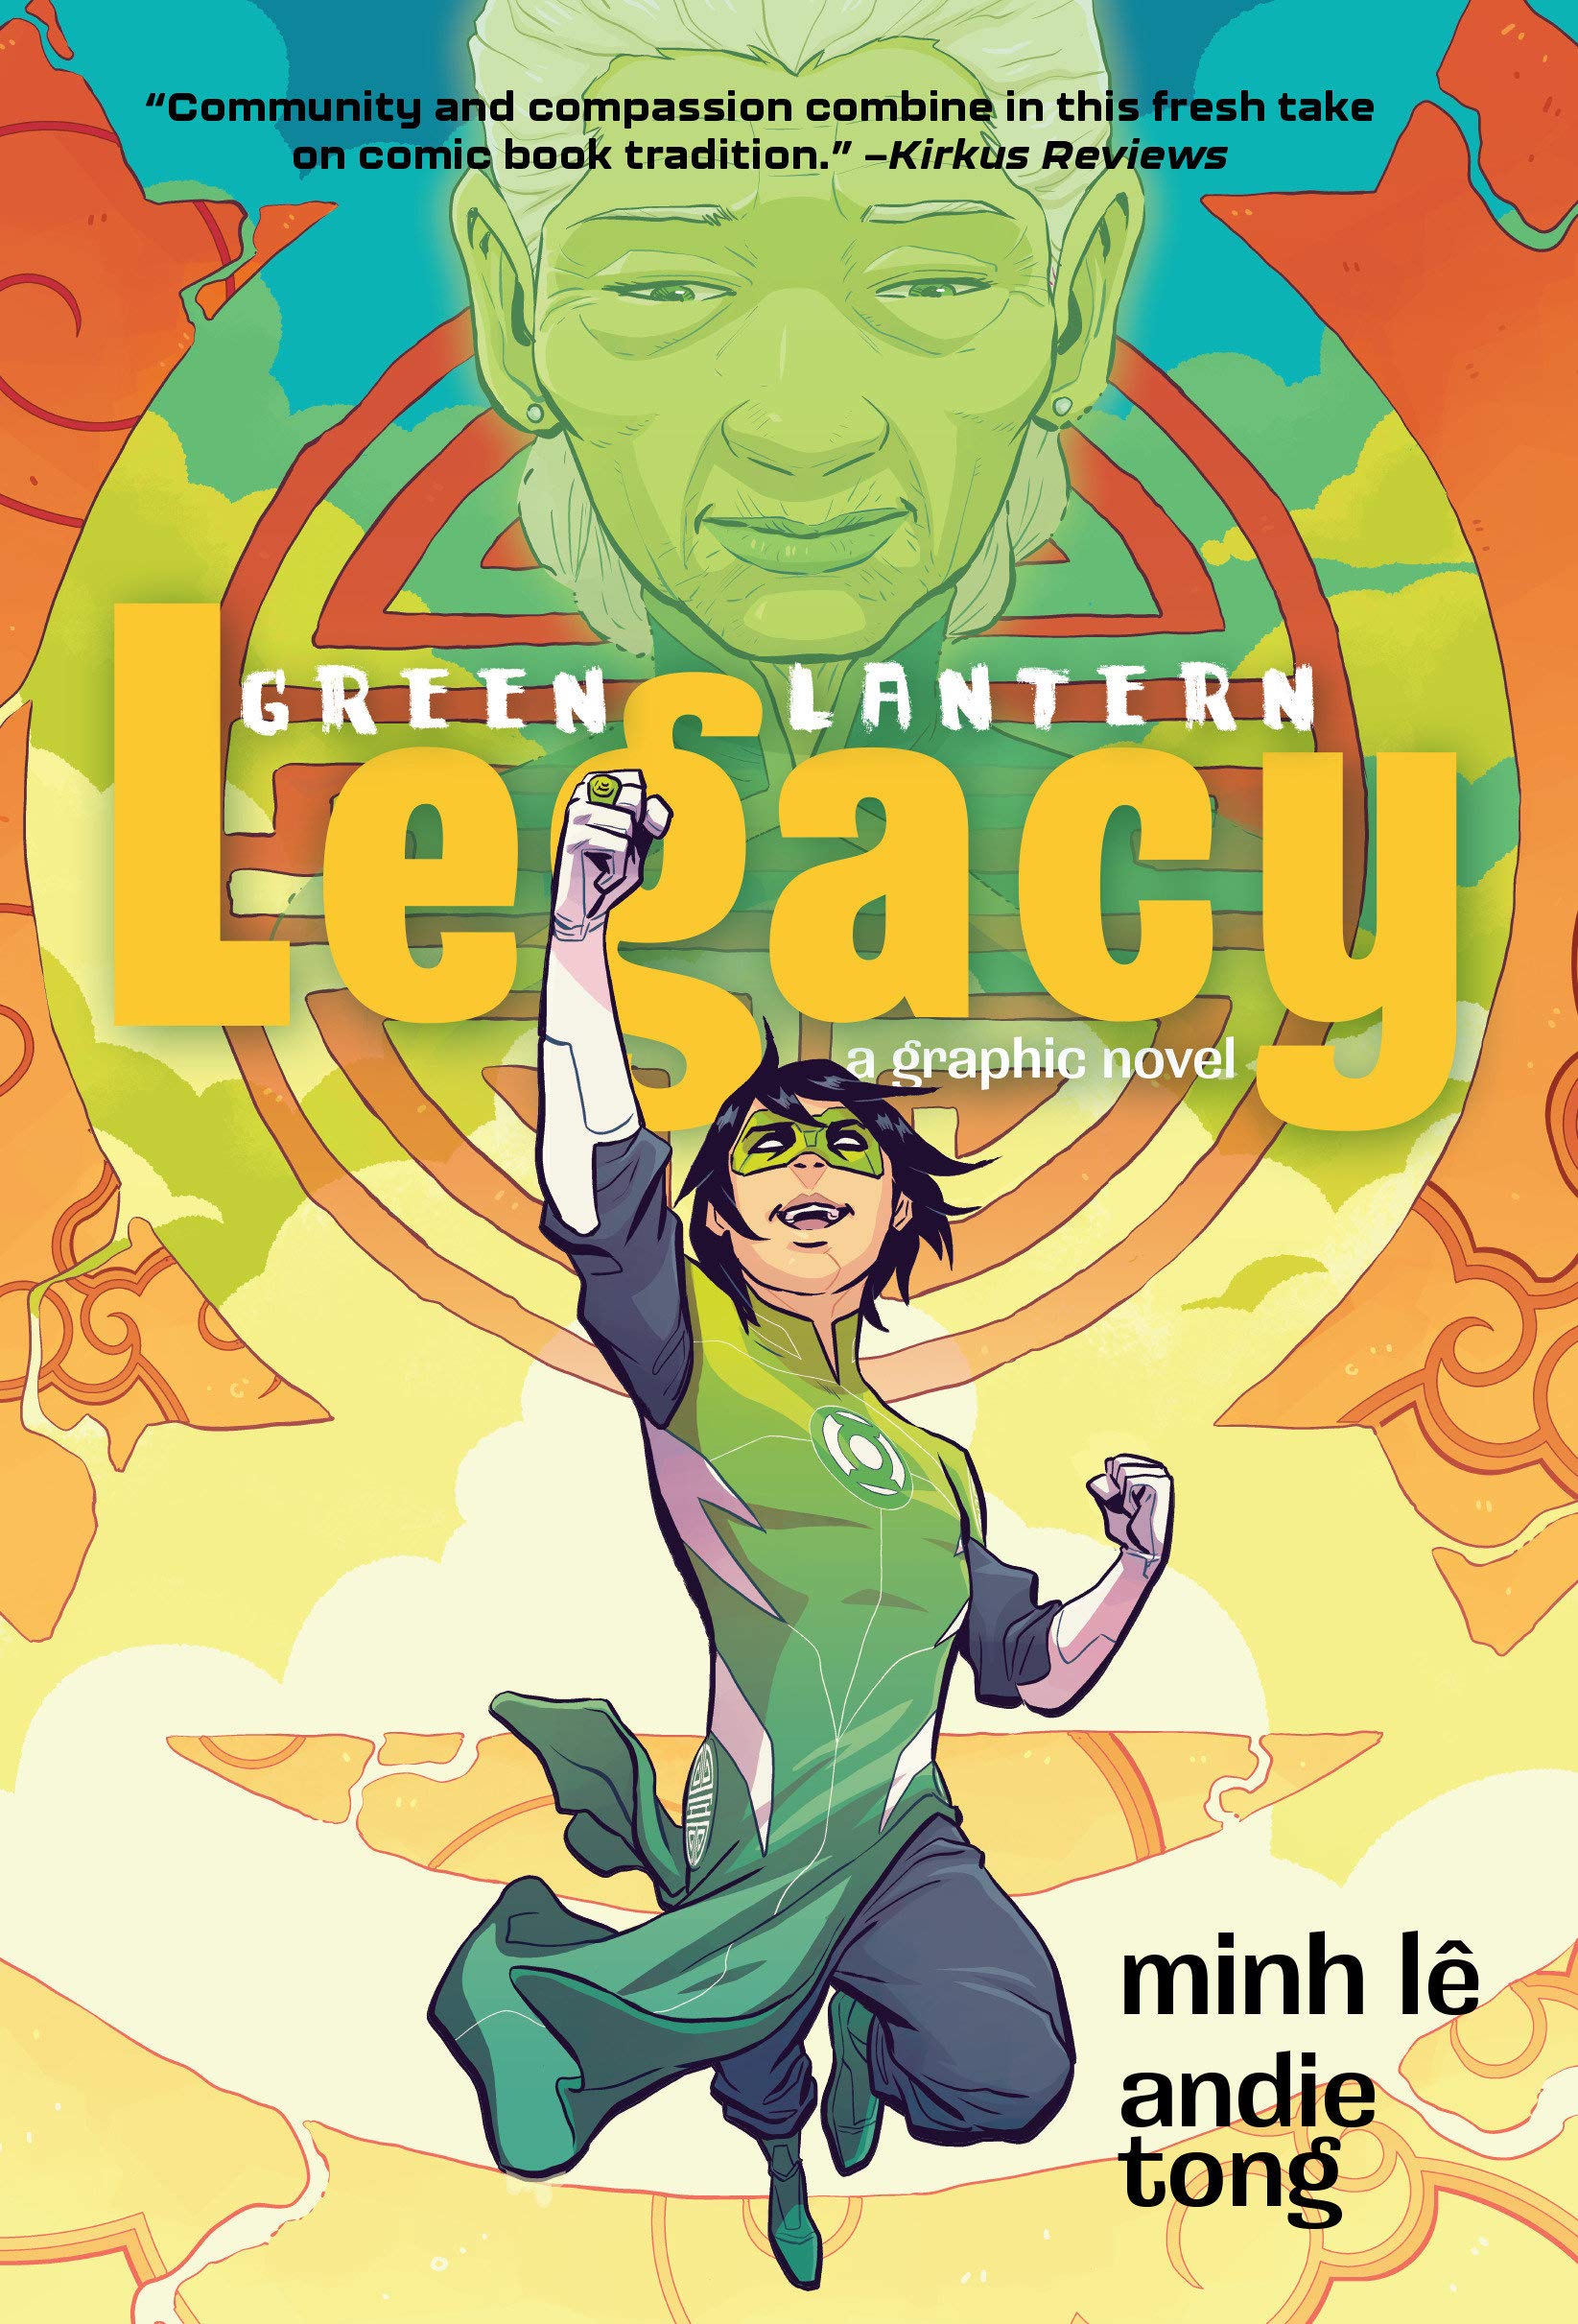 Image of the book cover of graphic novel entitled Green Lantern: Legacy by Minh Le featuring a young lady in a green outfit with her arm raised high as she is leaping. 